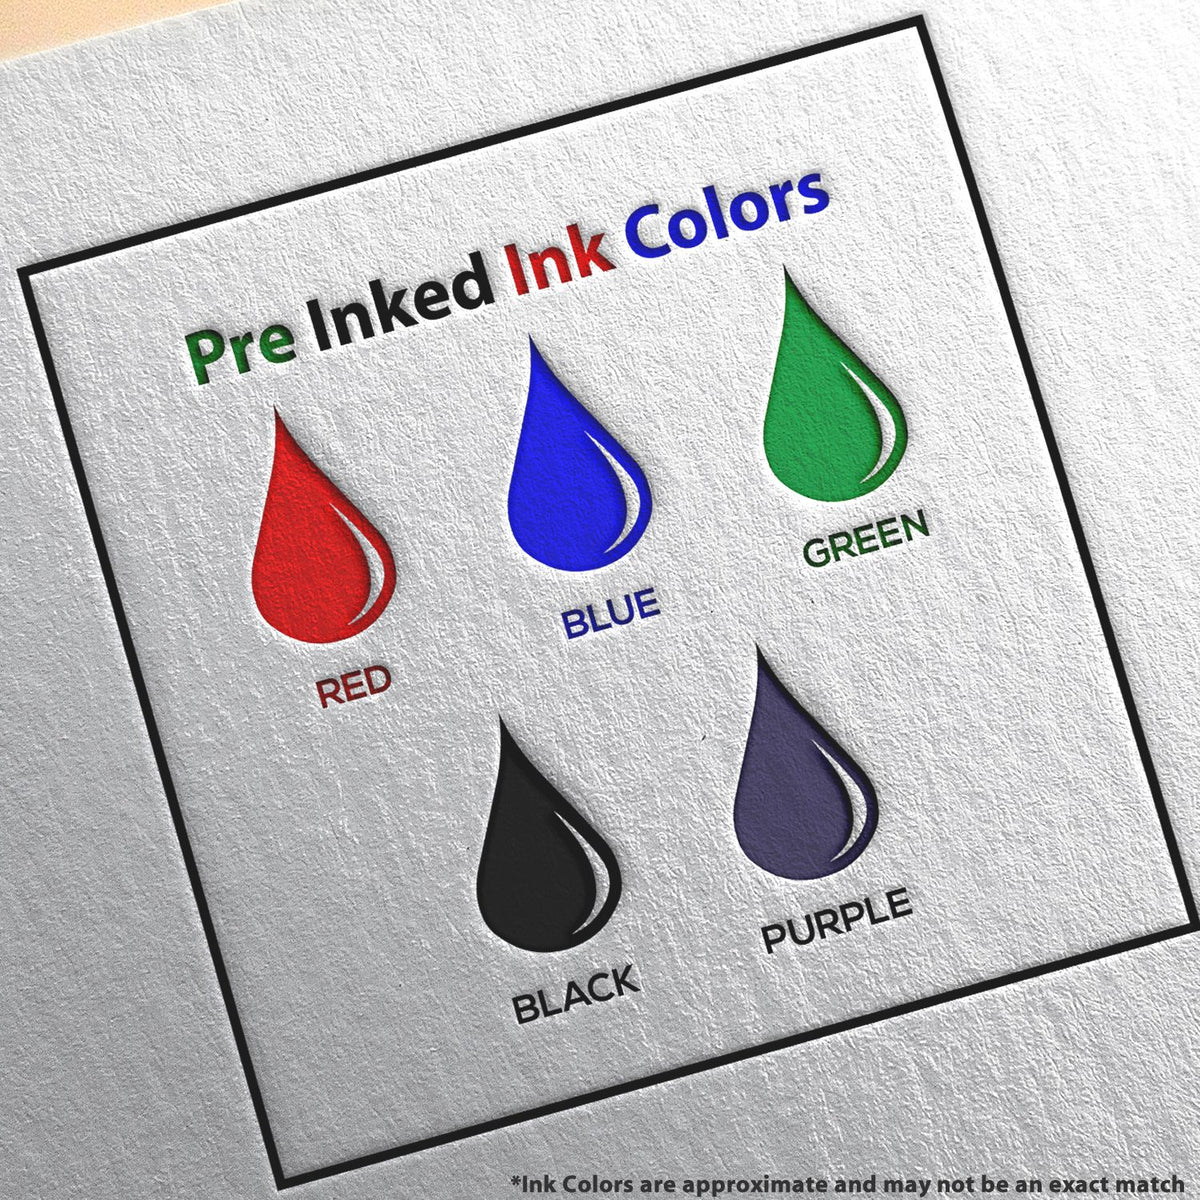 A picture showing the different ink colors or hues available for the Slim Pre-Inked Oklahoma Architect Seal Stamp product.